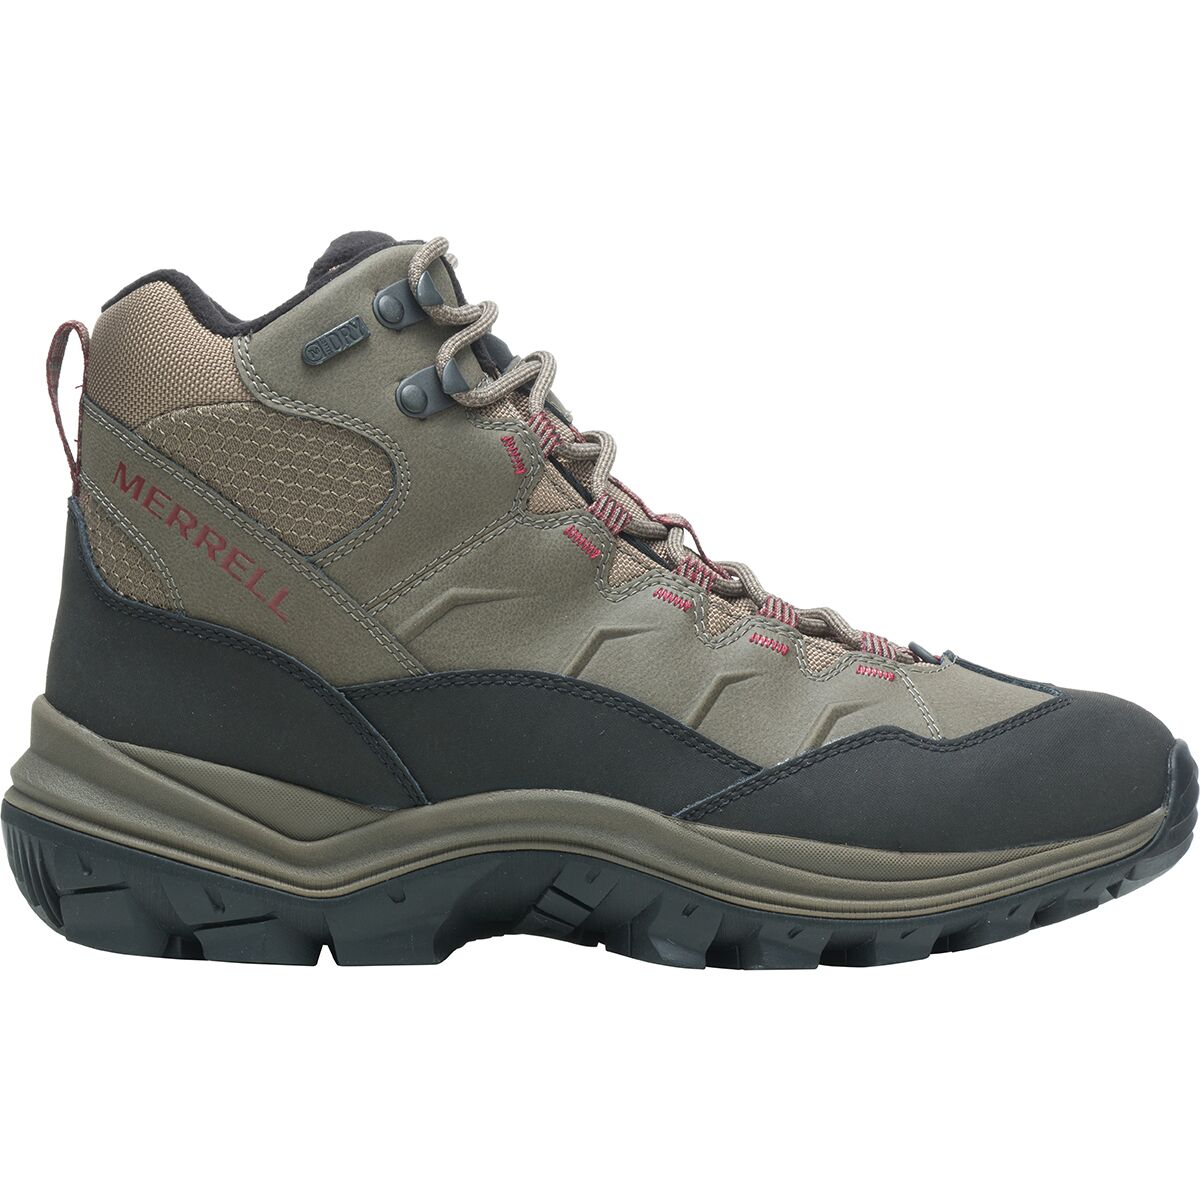 Merrell Thermo Chill Mid Shell Waterproof Boot - Men's